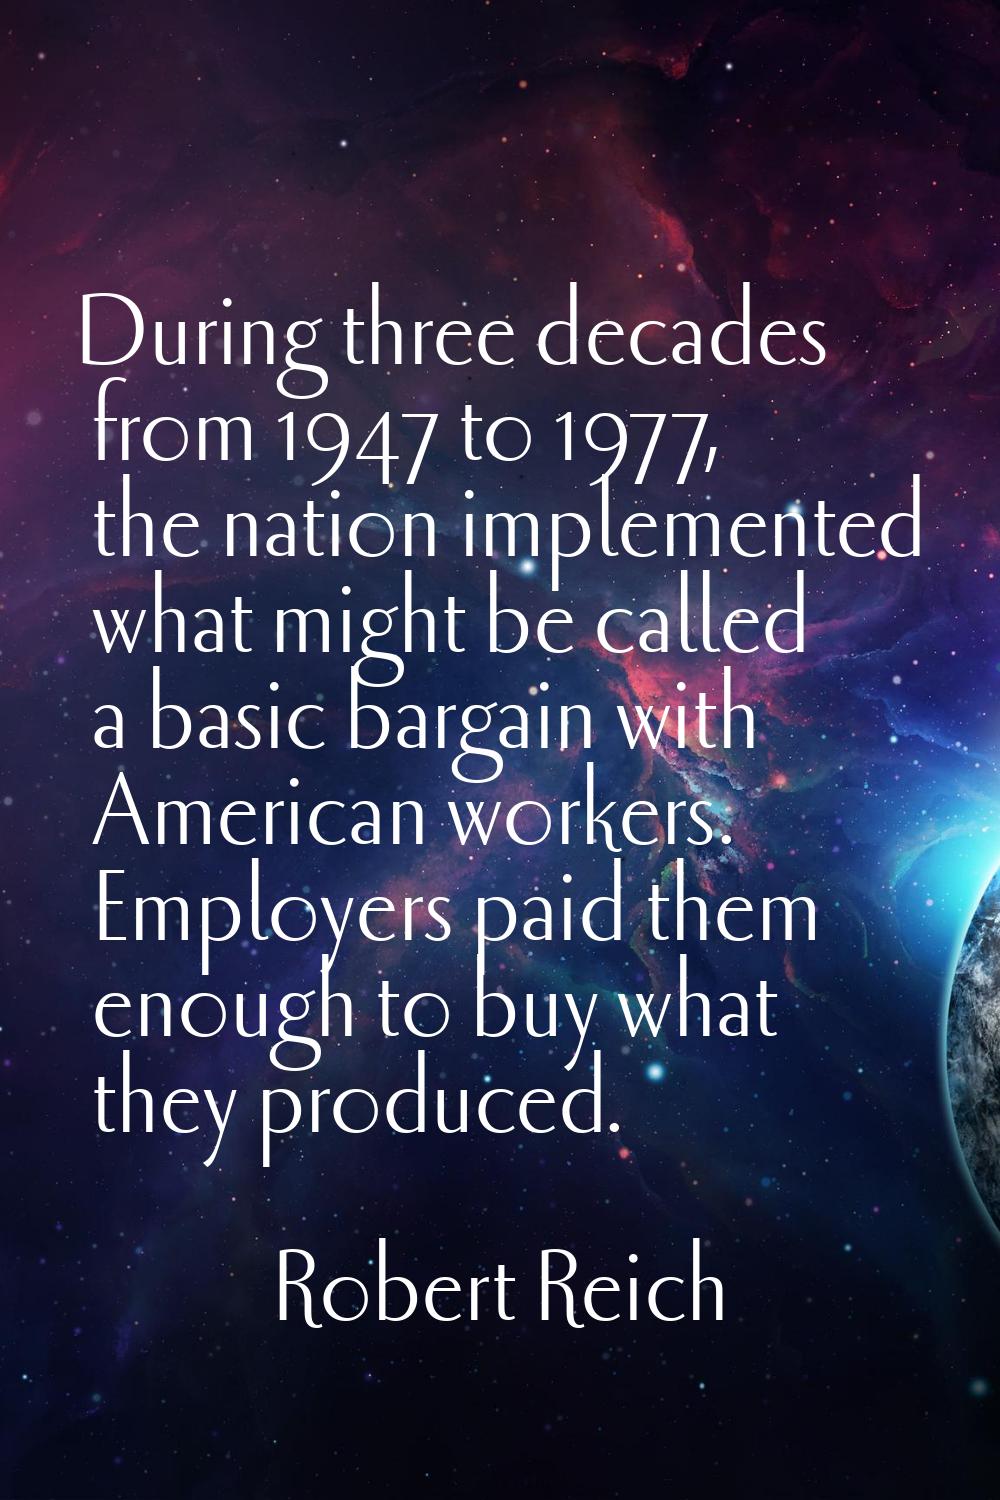 During three decades from 1947 to 1977, the nation implemented what might be called a basic bargain